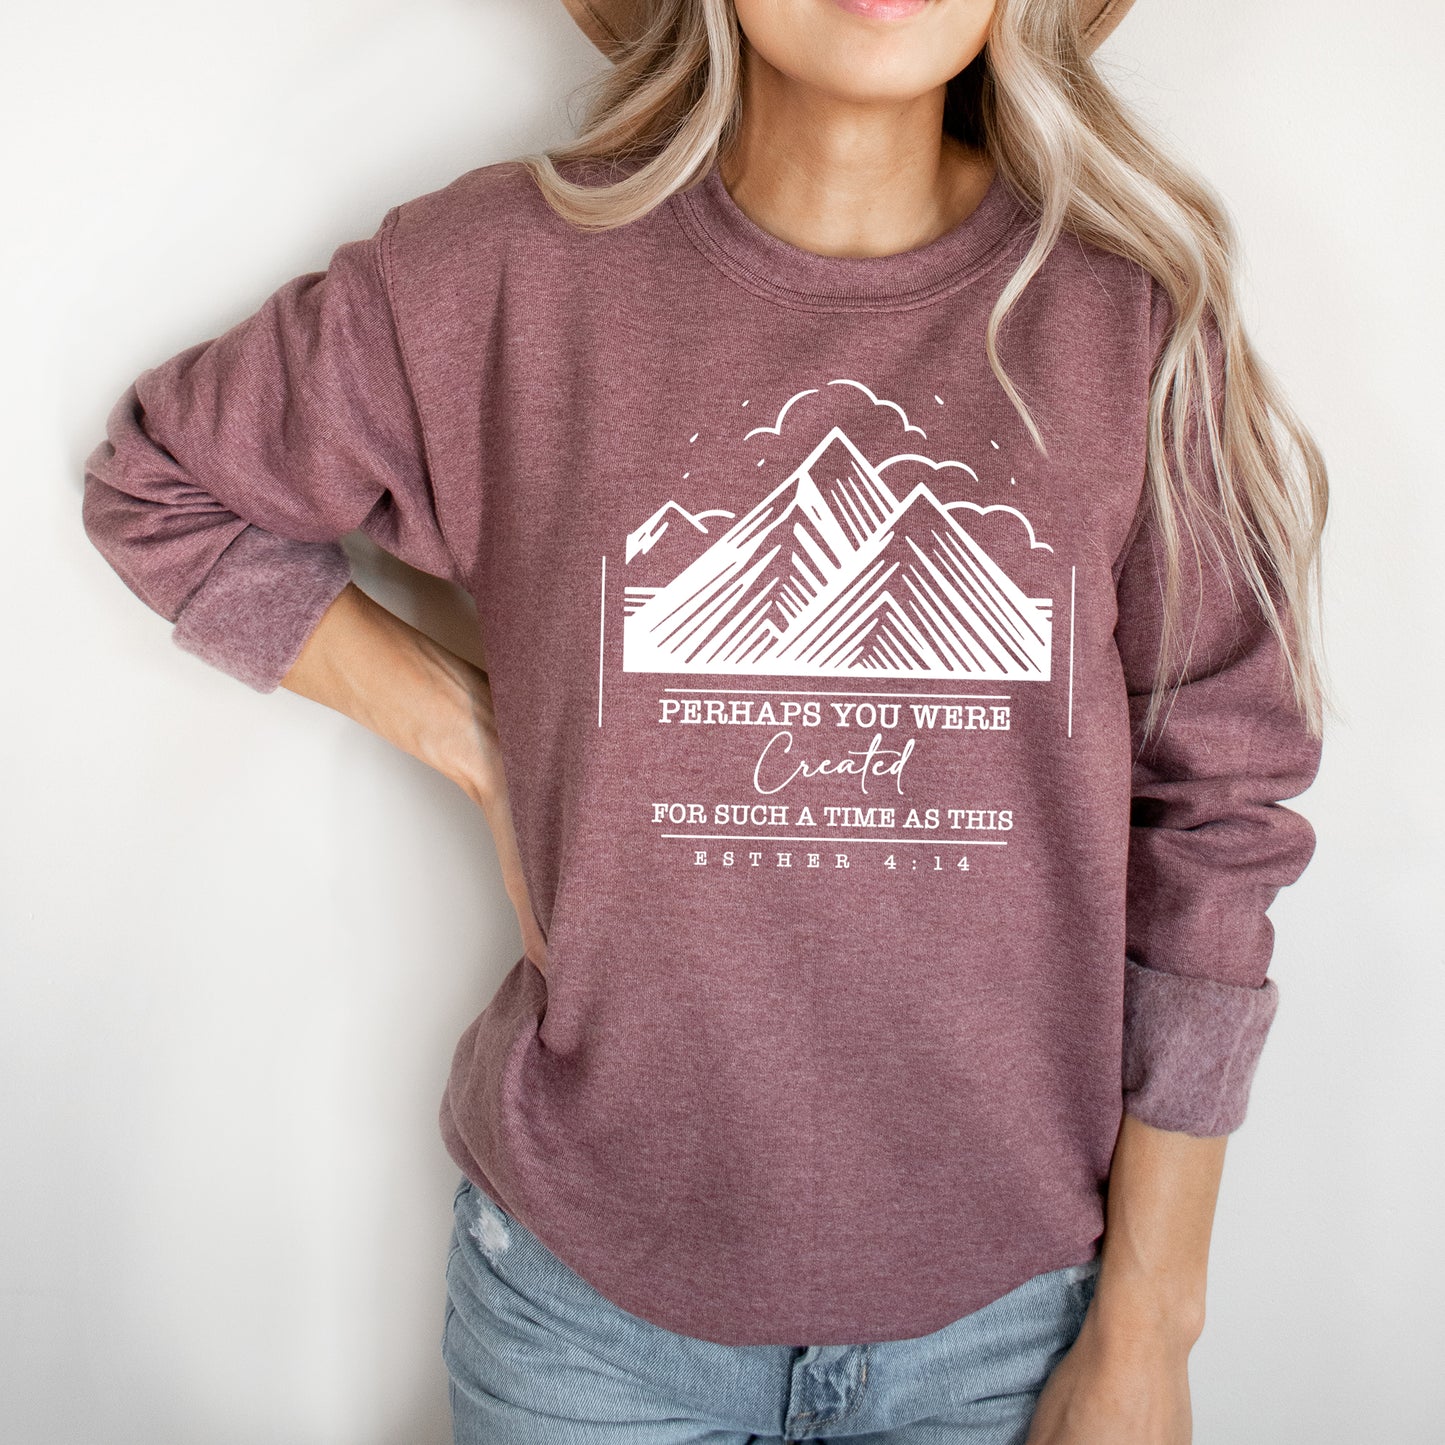 You Were Created Mountains| Graphic Sweatshirt